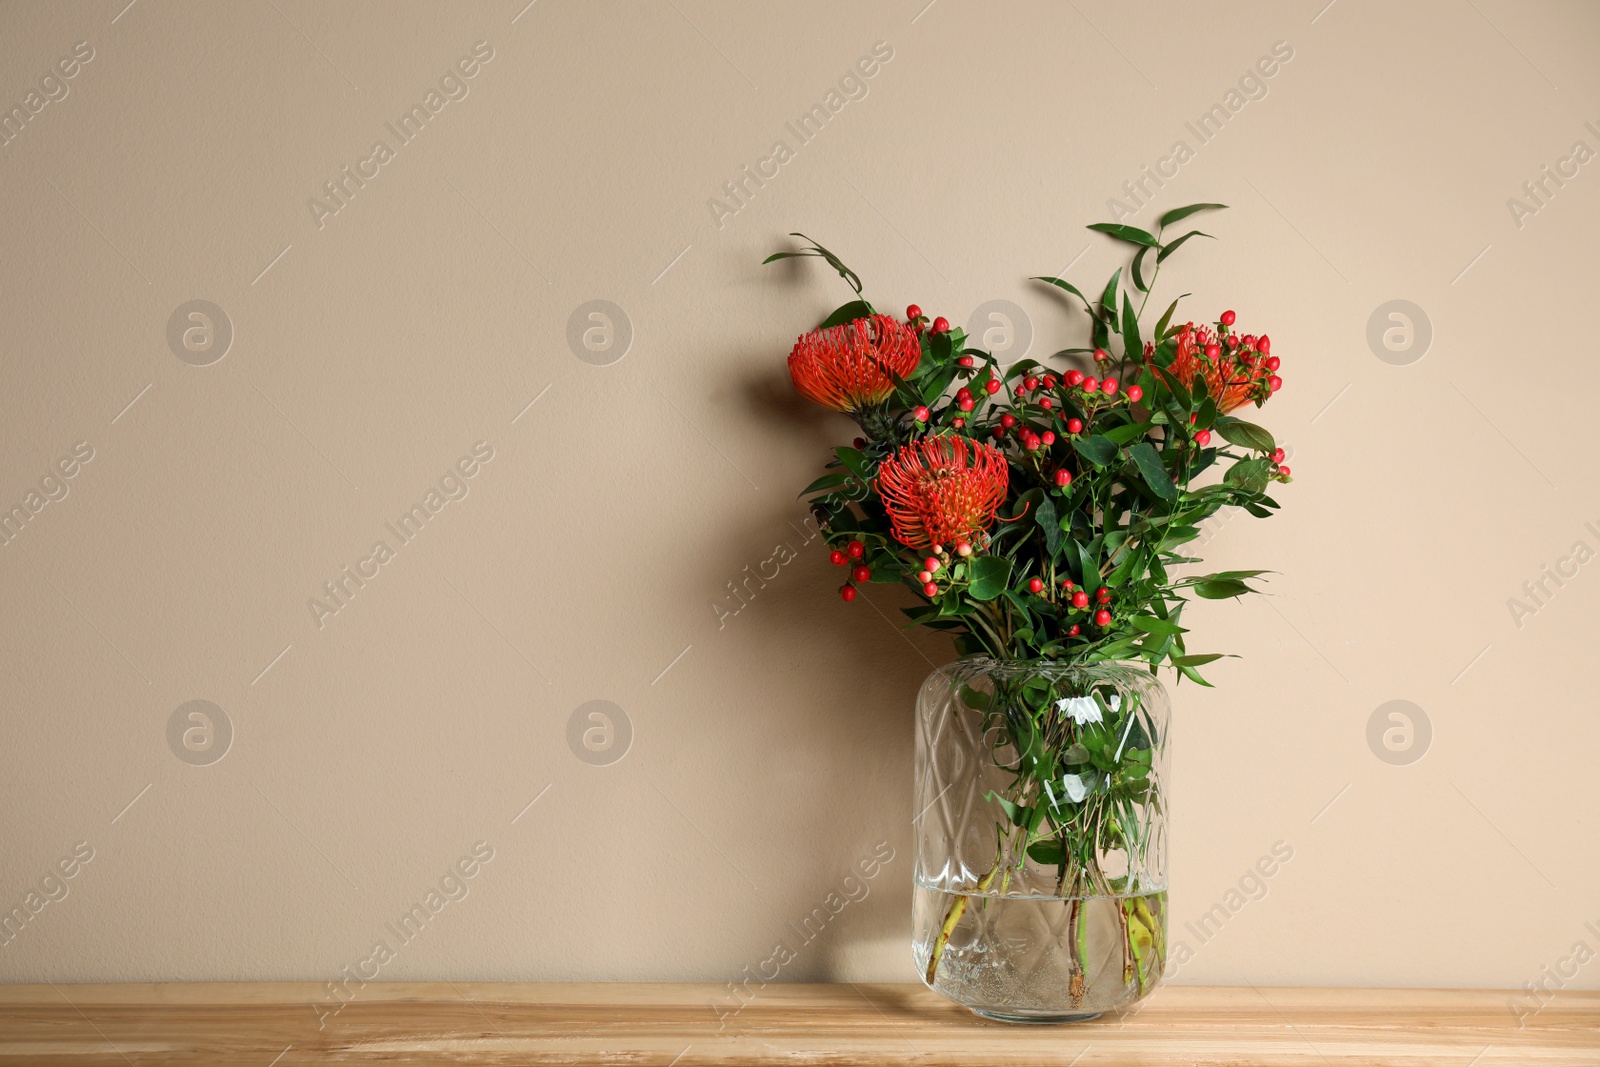 Photo of Bouquet with beautiful red protea flowers in vase on wooden table against beige background. Space for text